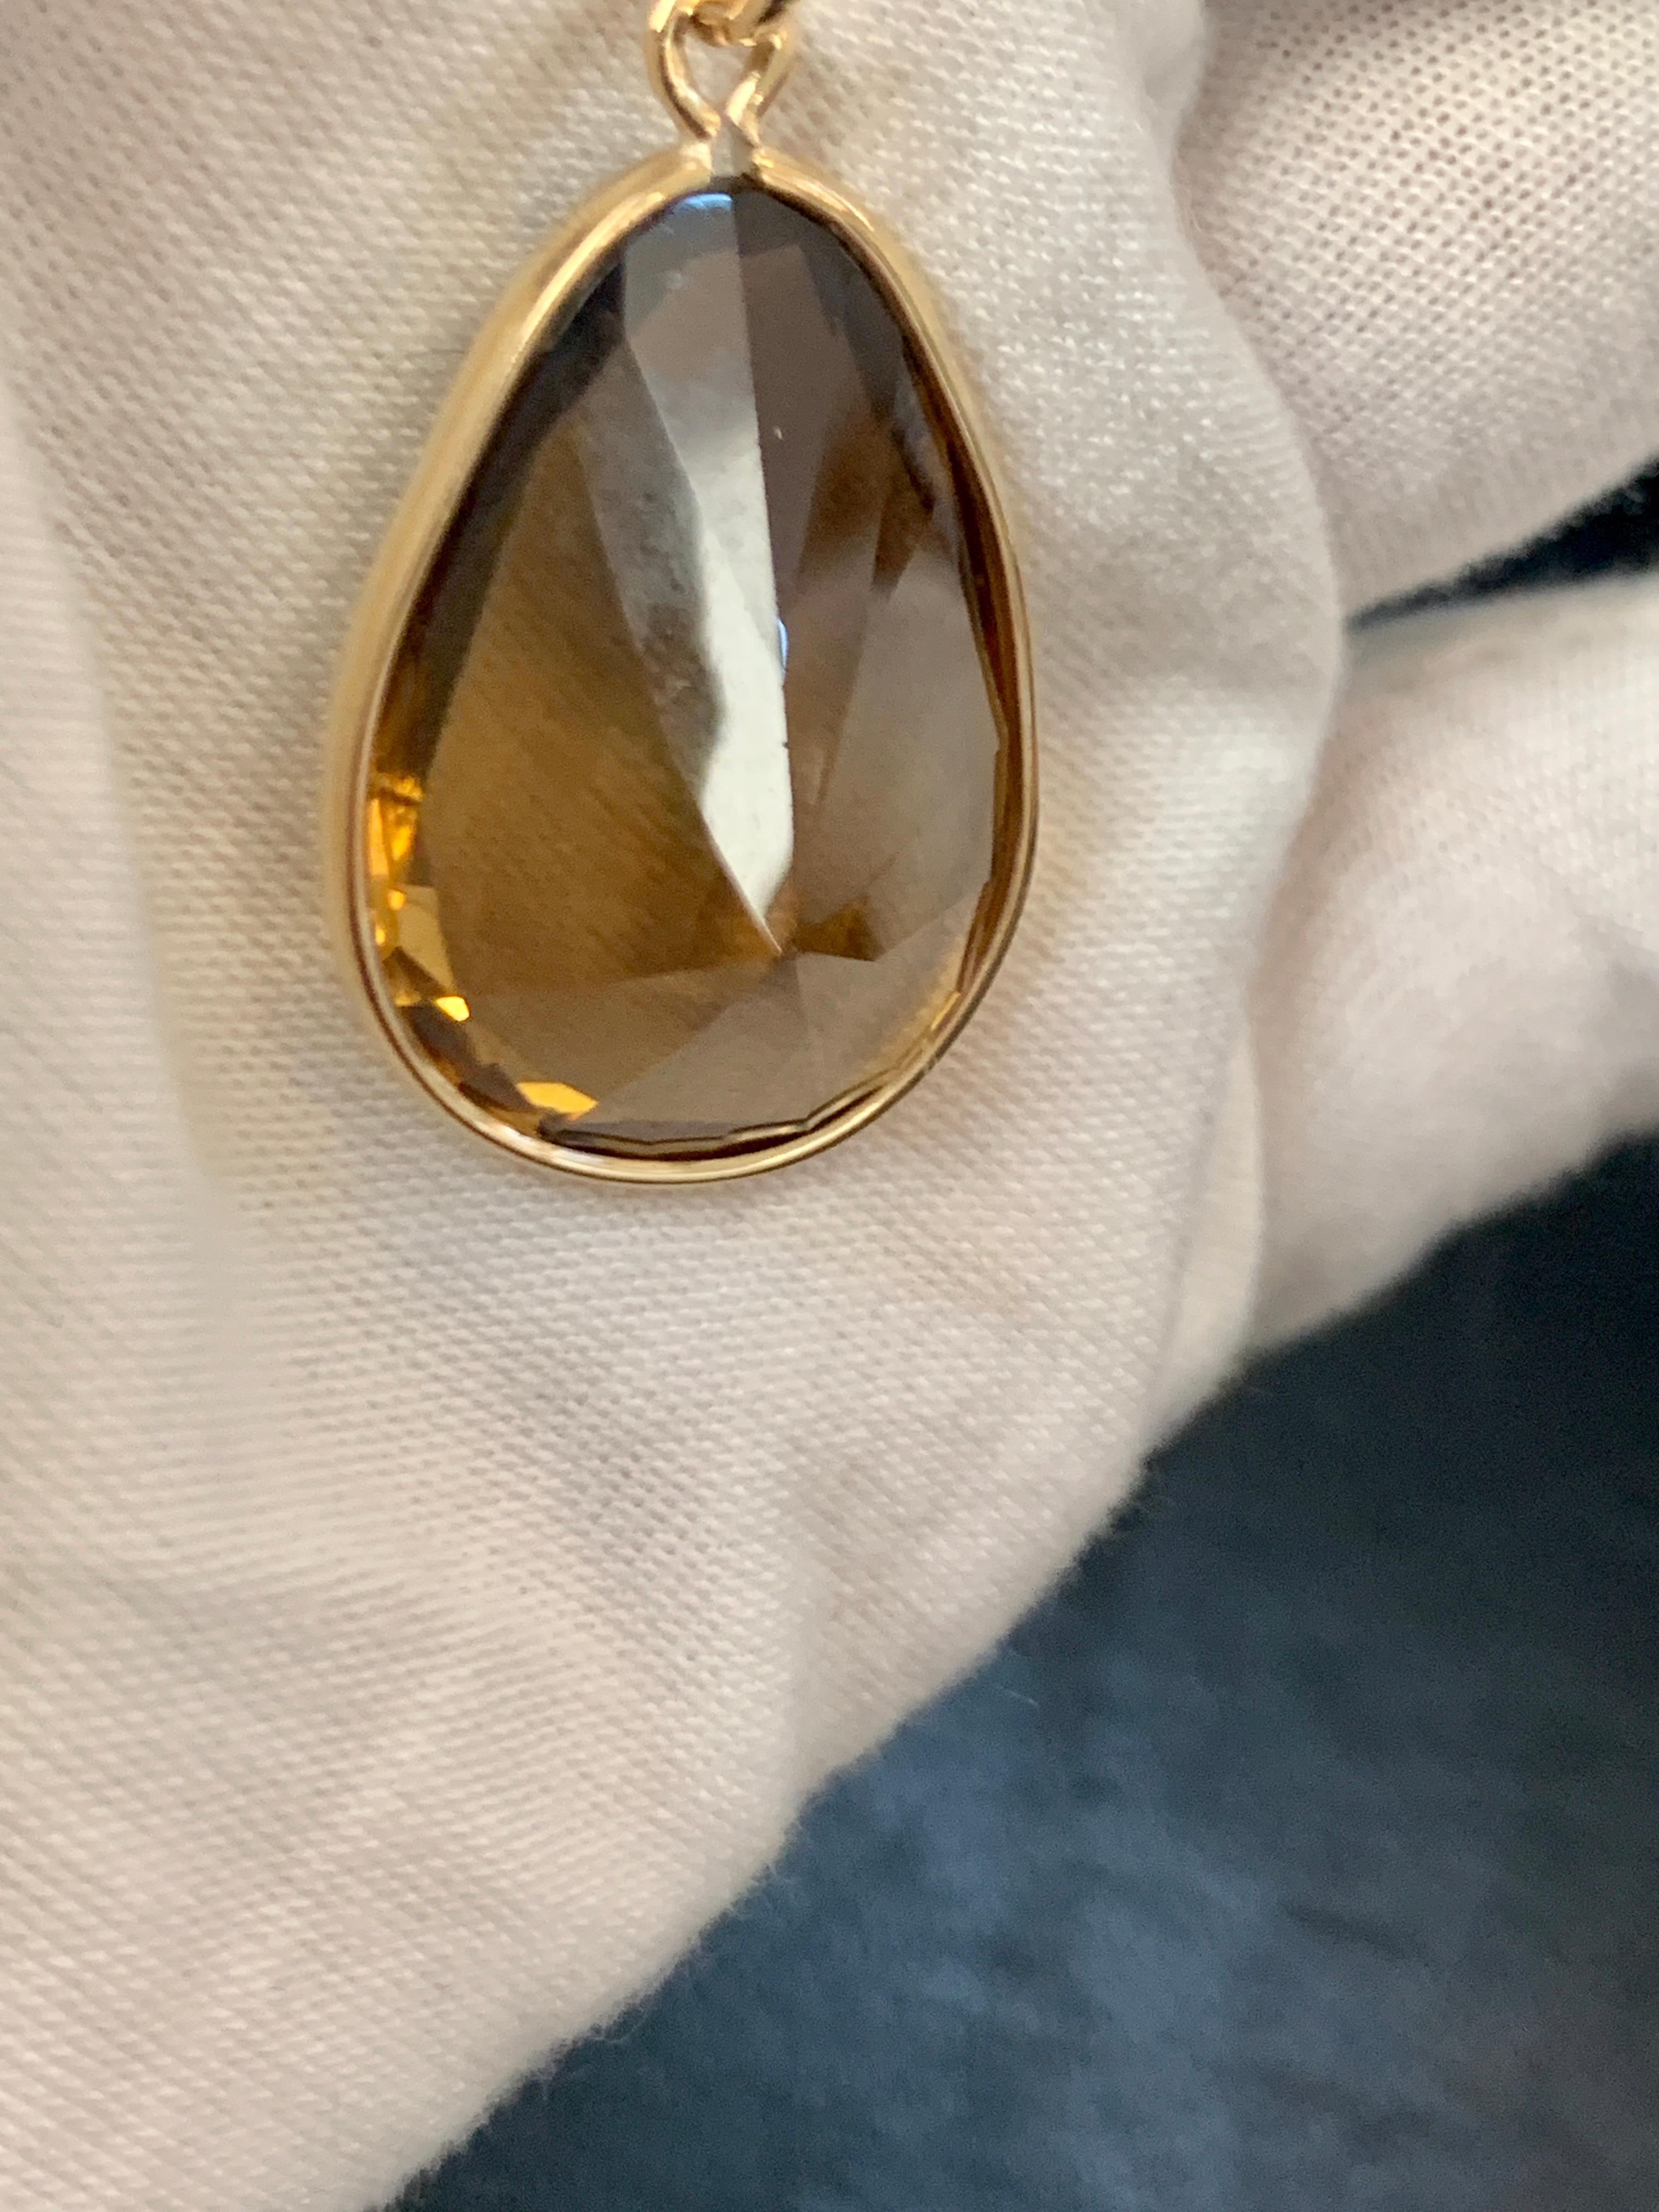 19 Carat Pear Shape Citrine Pendent or Necklace 14 Karat Yellow Gold with Chain 1